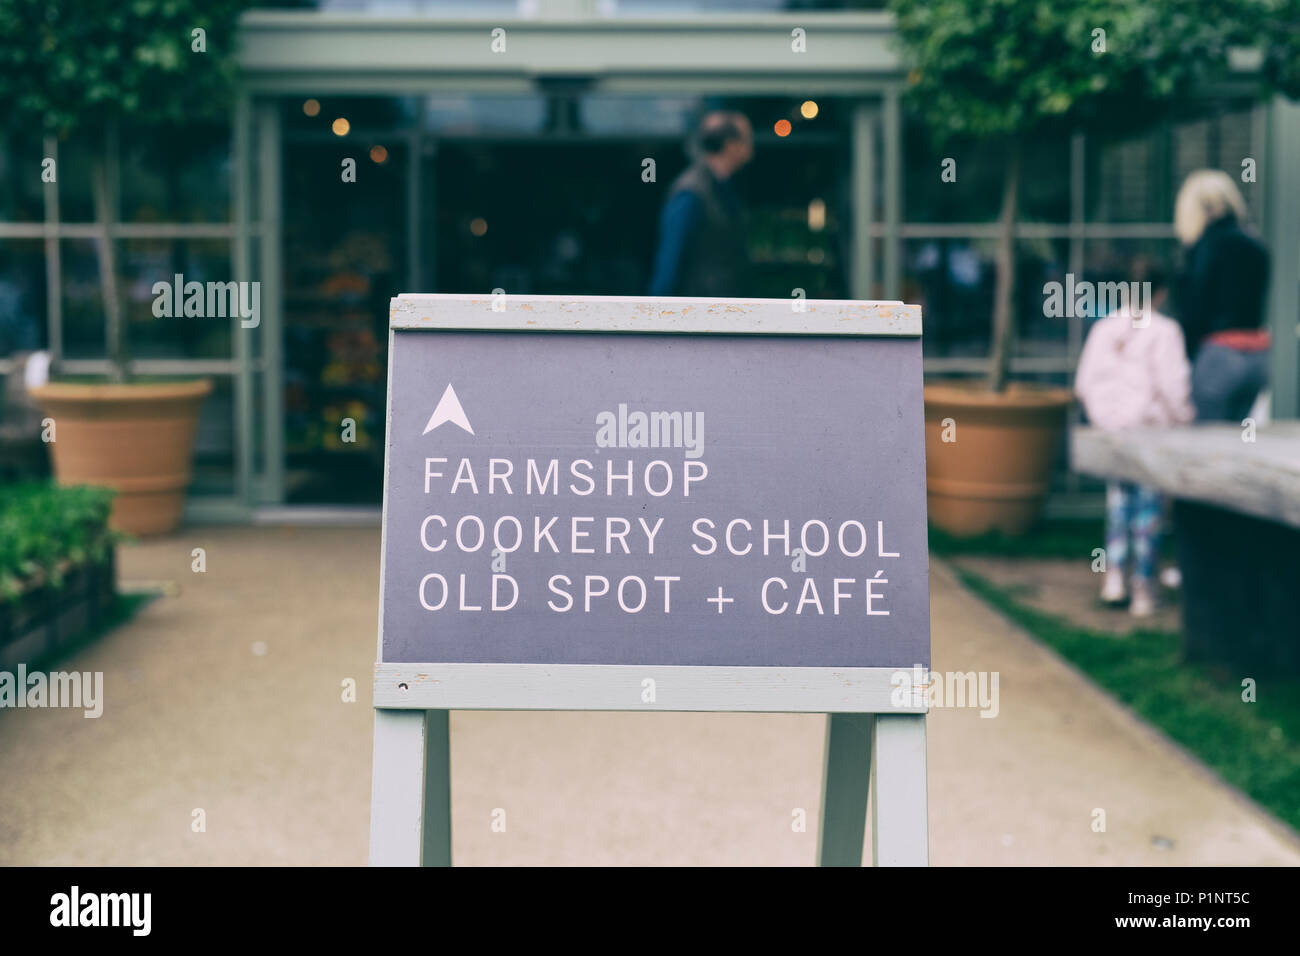 Farmshop, Cookery school, old spot and cafe sign at Daylesford Organic farm shop summer festival. Daylesford, Cotswolds, Gloucestershire, England. Stock Photo